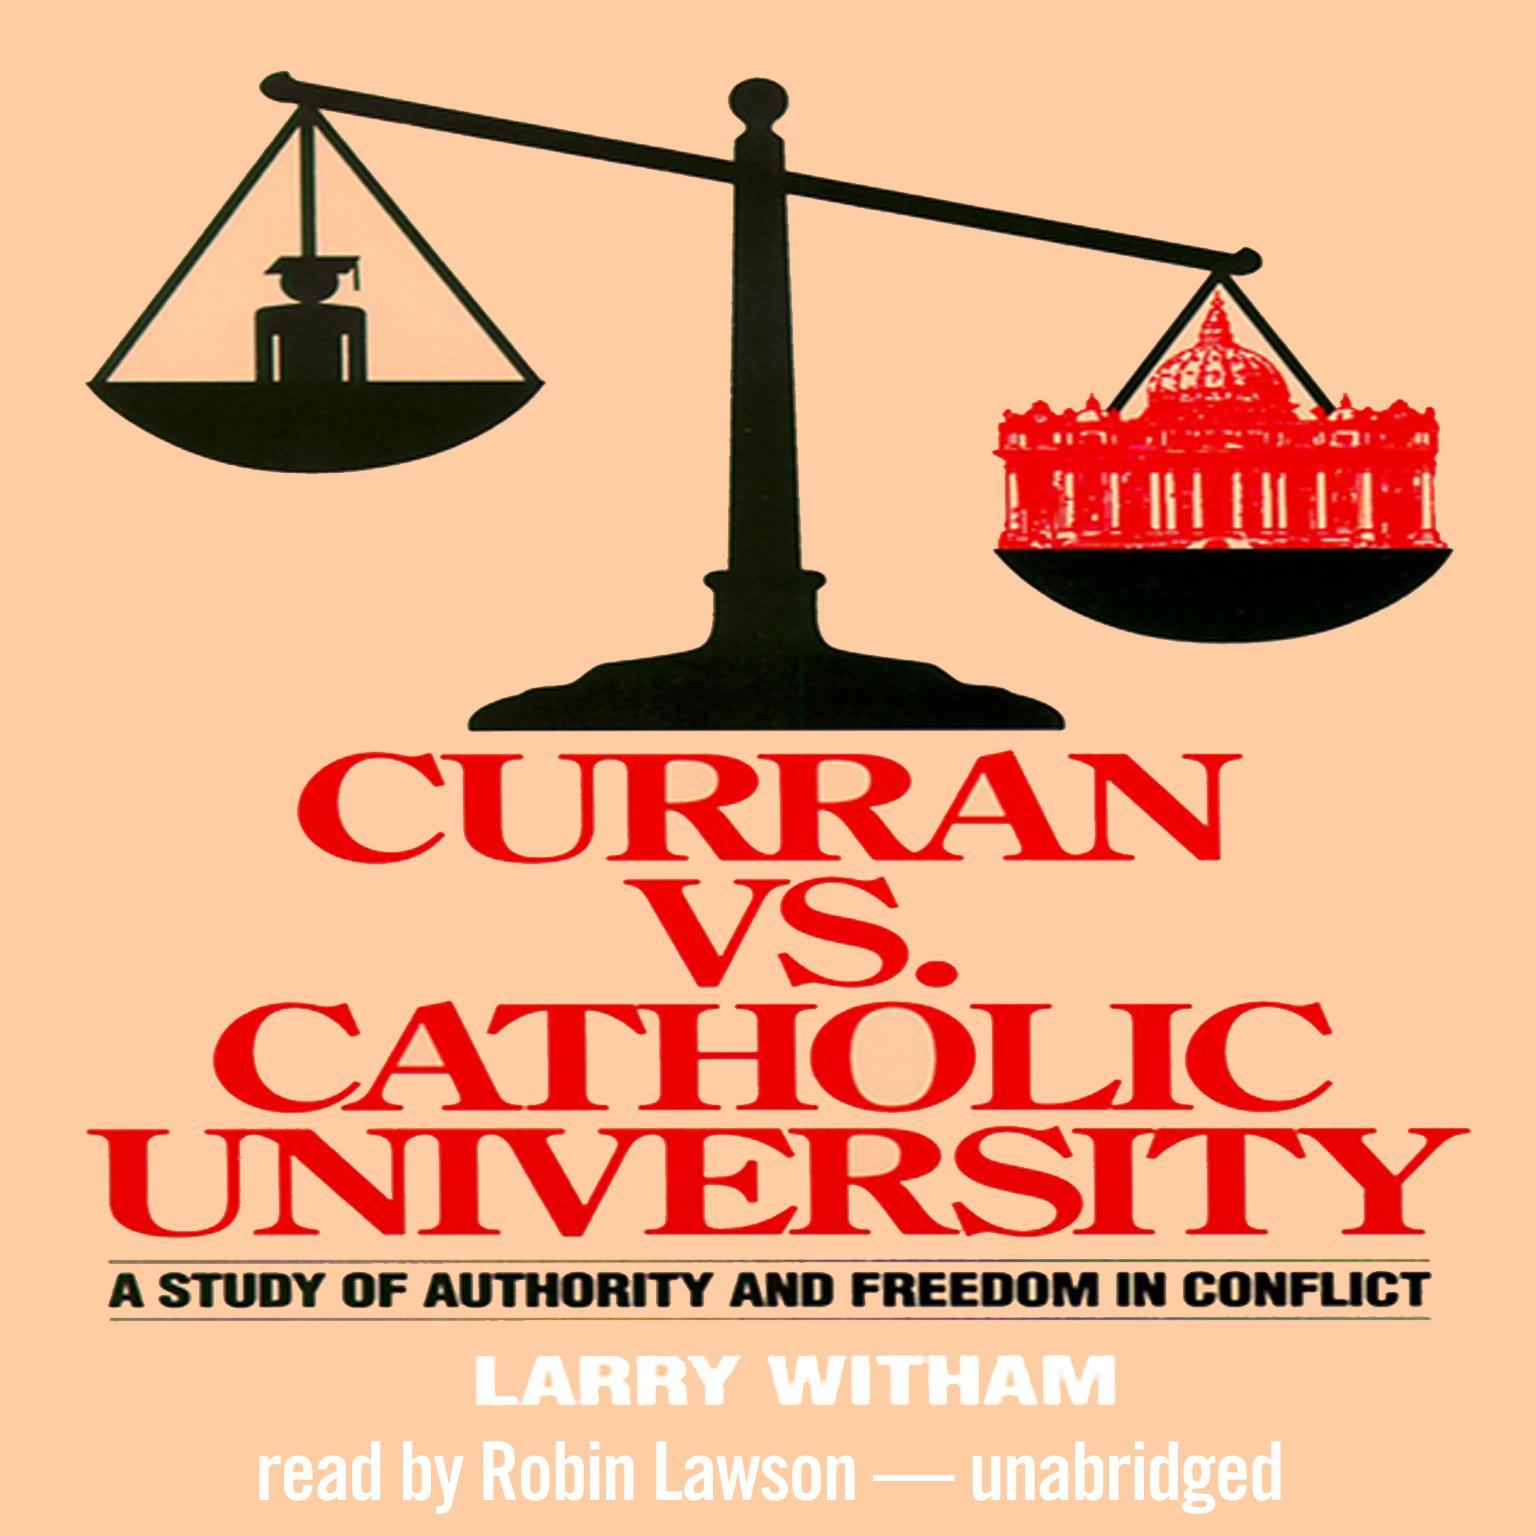 Curran vs. Catholic University: A Study of Authority and Freedom in Conflict Audiobook, by Larry Witham